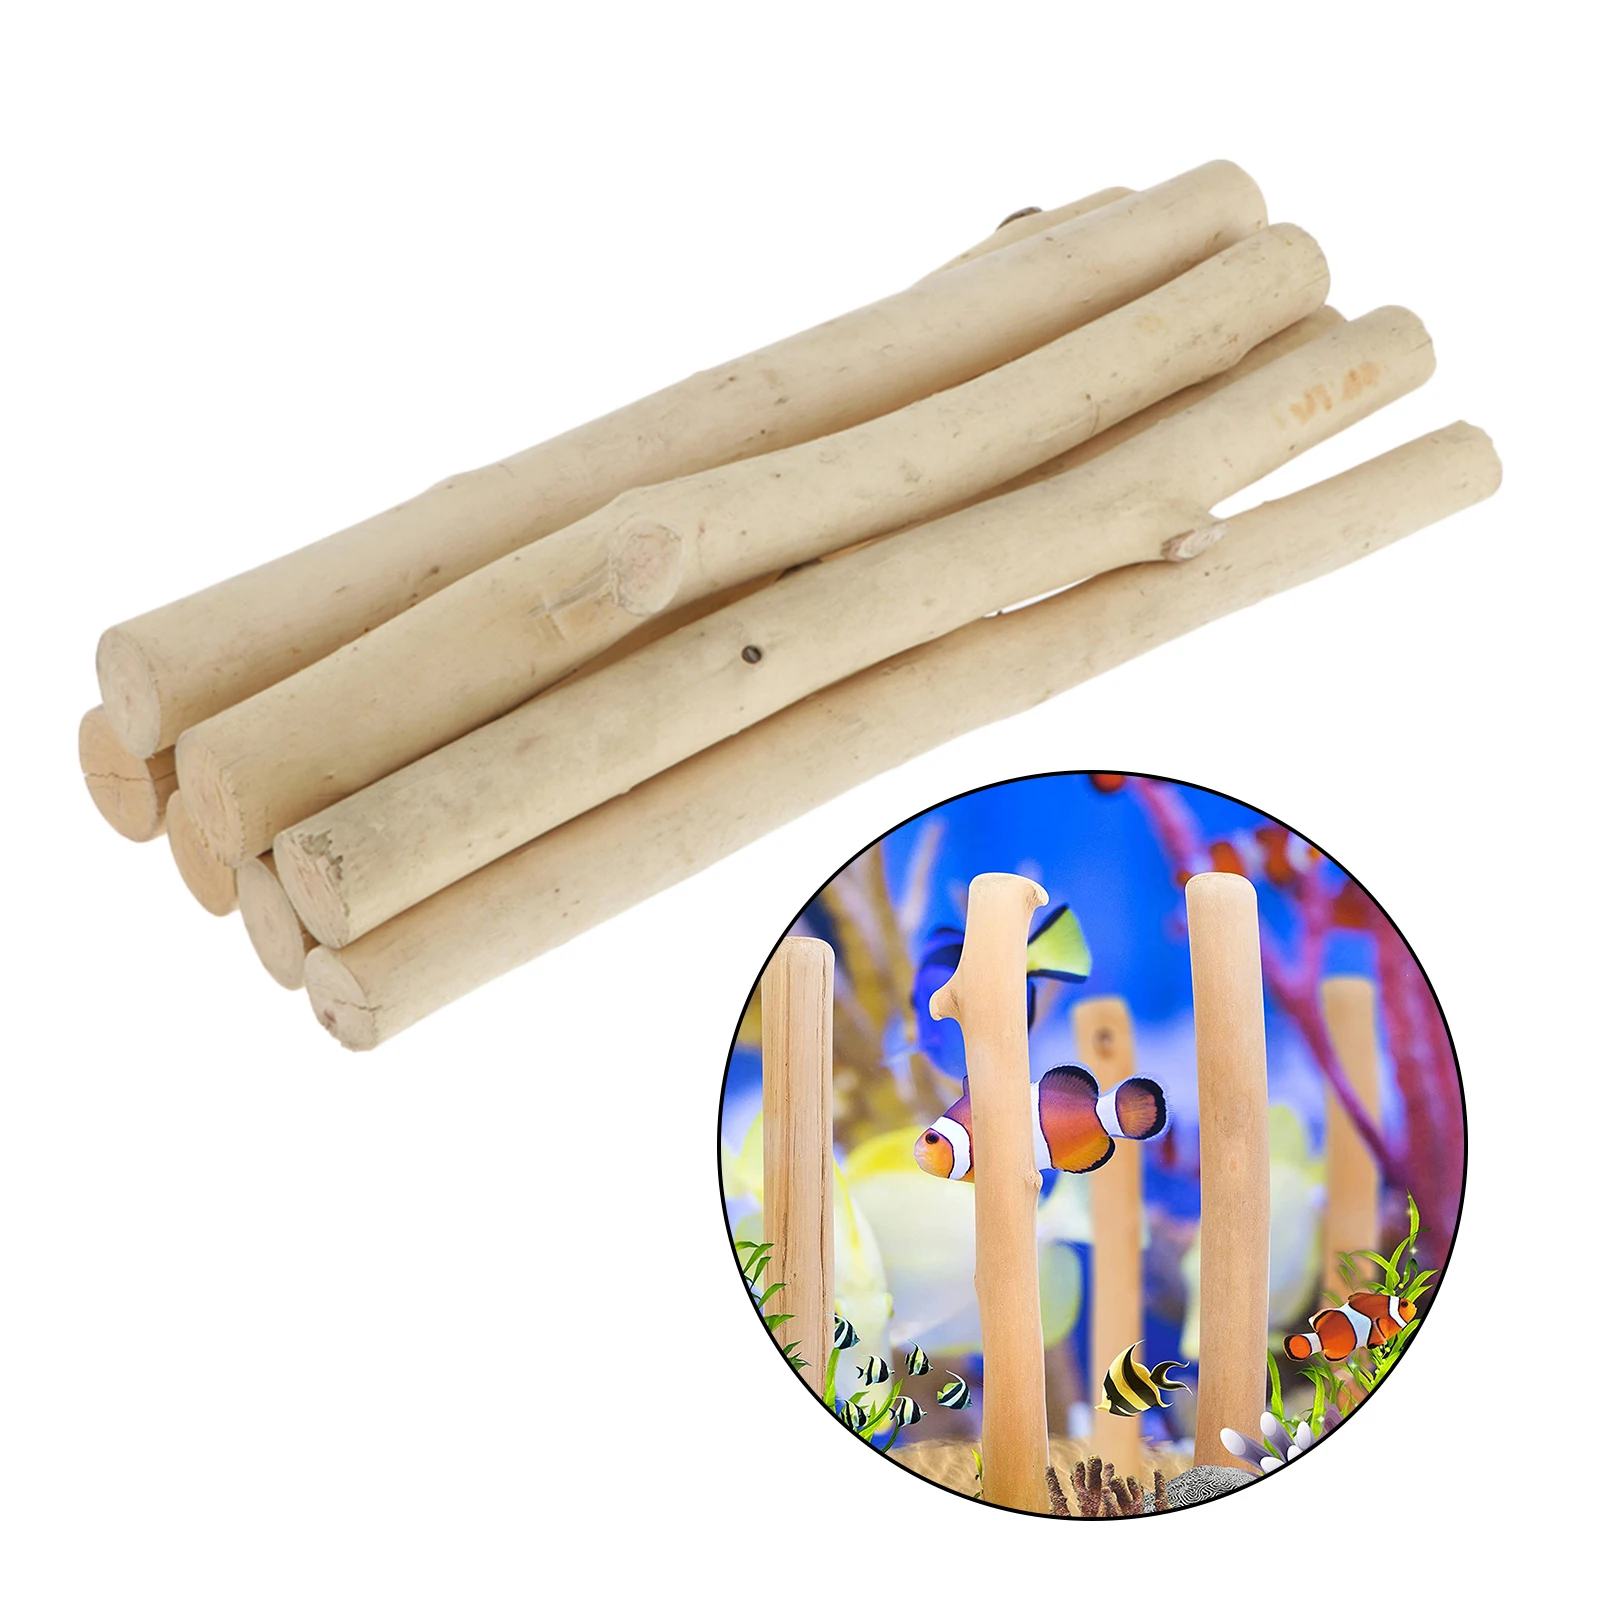 7PACK Unfinished Wooden Sticks Dowel Rods for DIY Crafts Natural Branches for Floristry, Wreath Making and Home Decorations